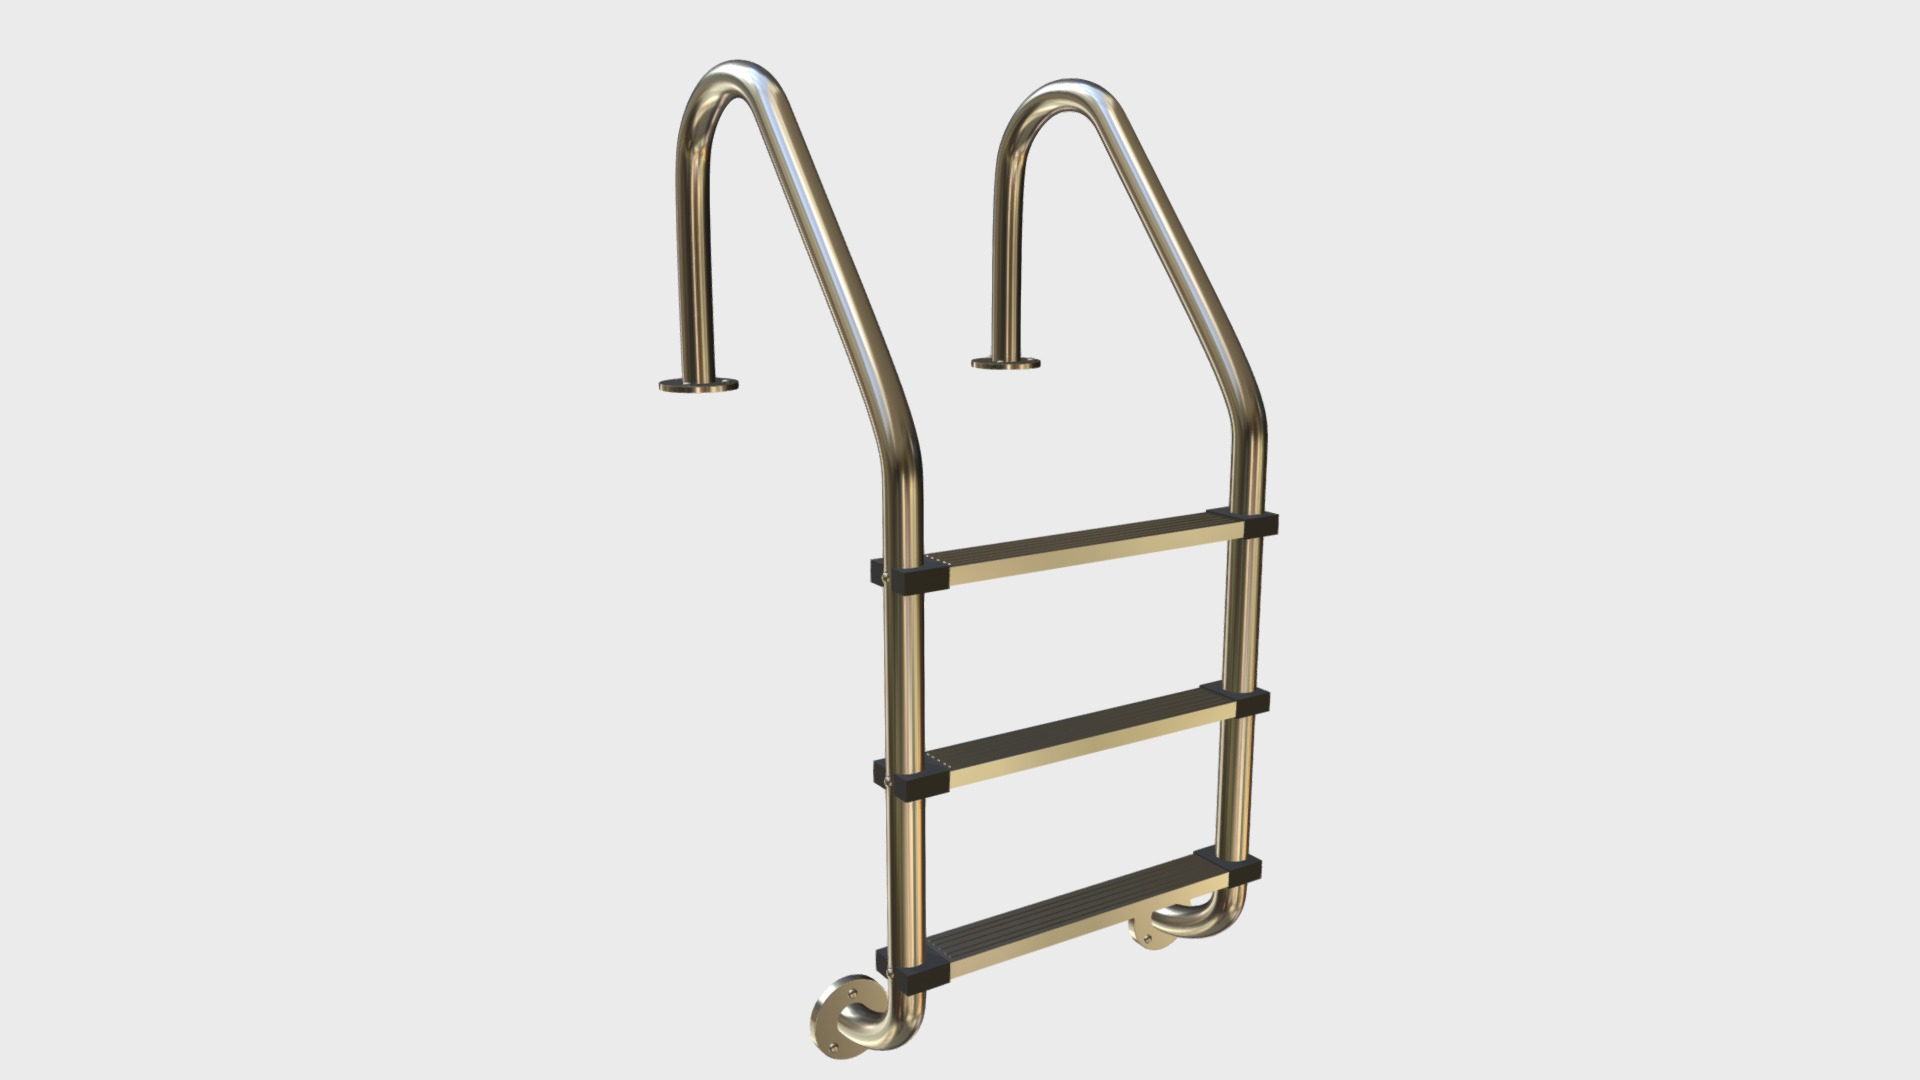 3D model Pool ladder 1 - This is a 3D model of the Pool ladder 1. The 3D model is about a metal chair with a metal frame.